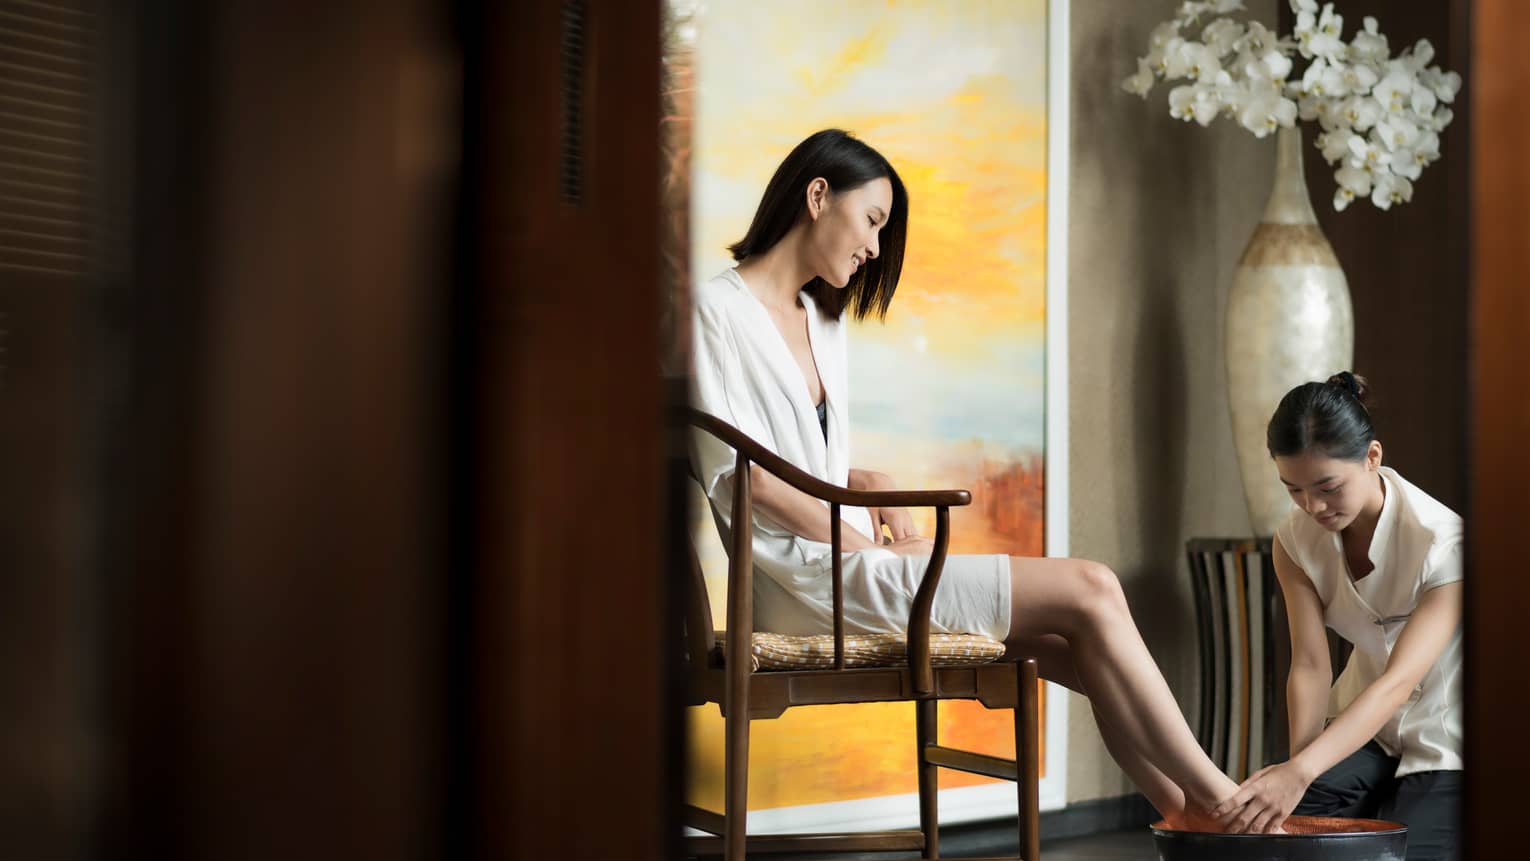 Spa staff rinses woman's feet in bowl as she sits in chair in white robe